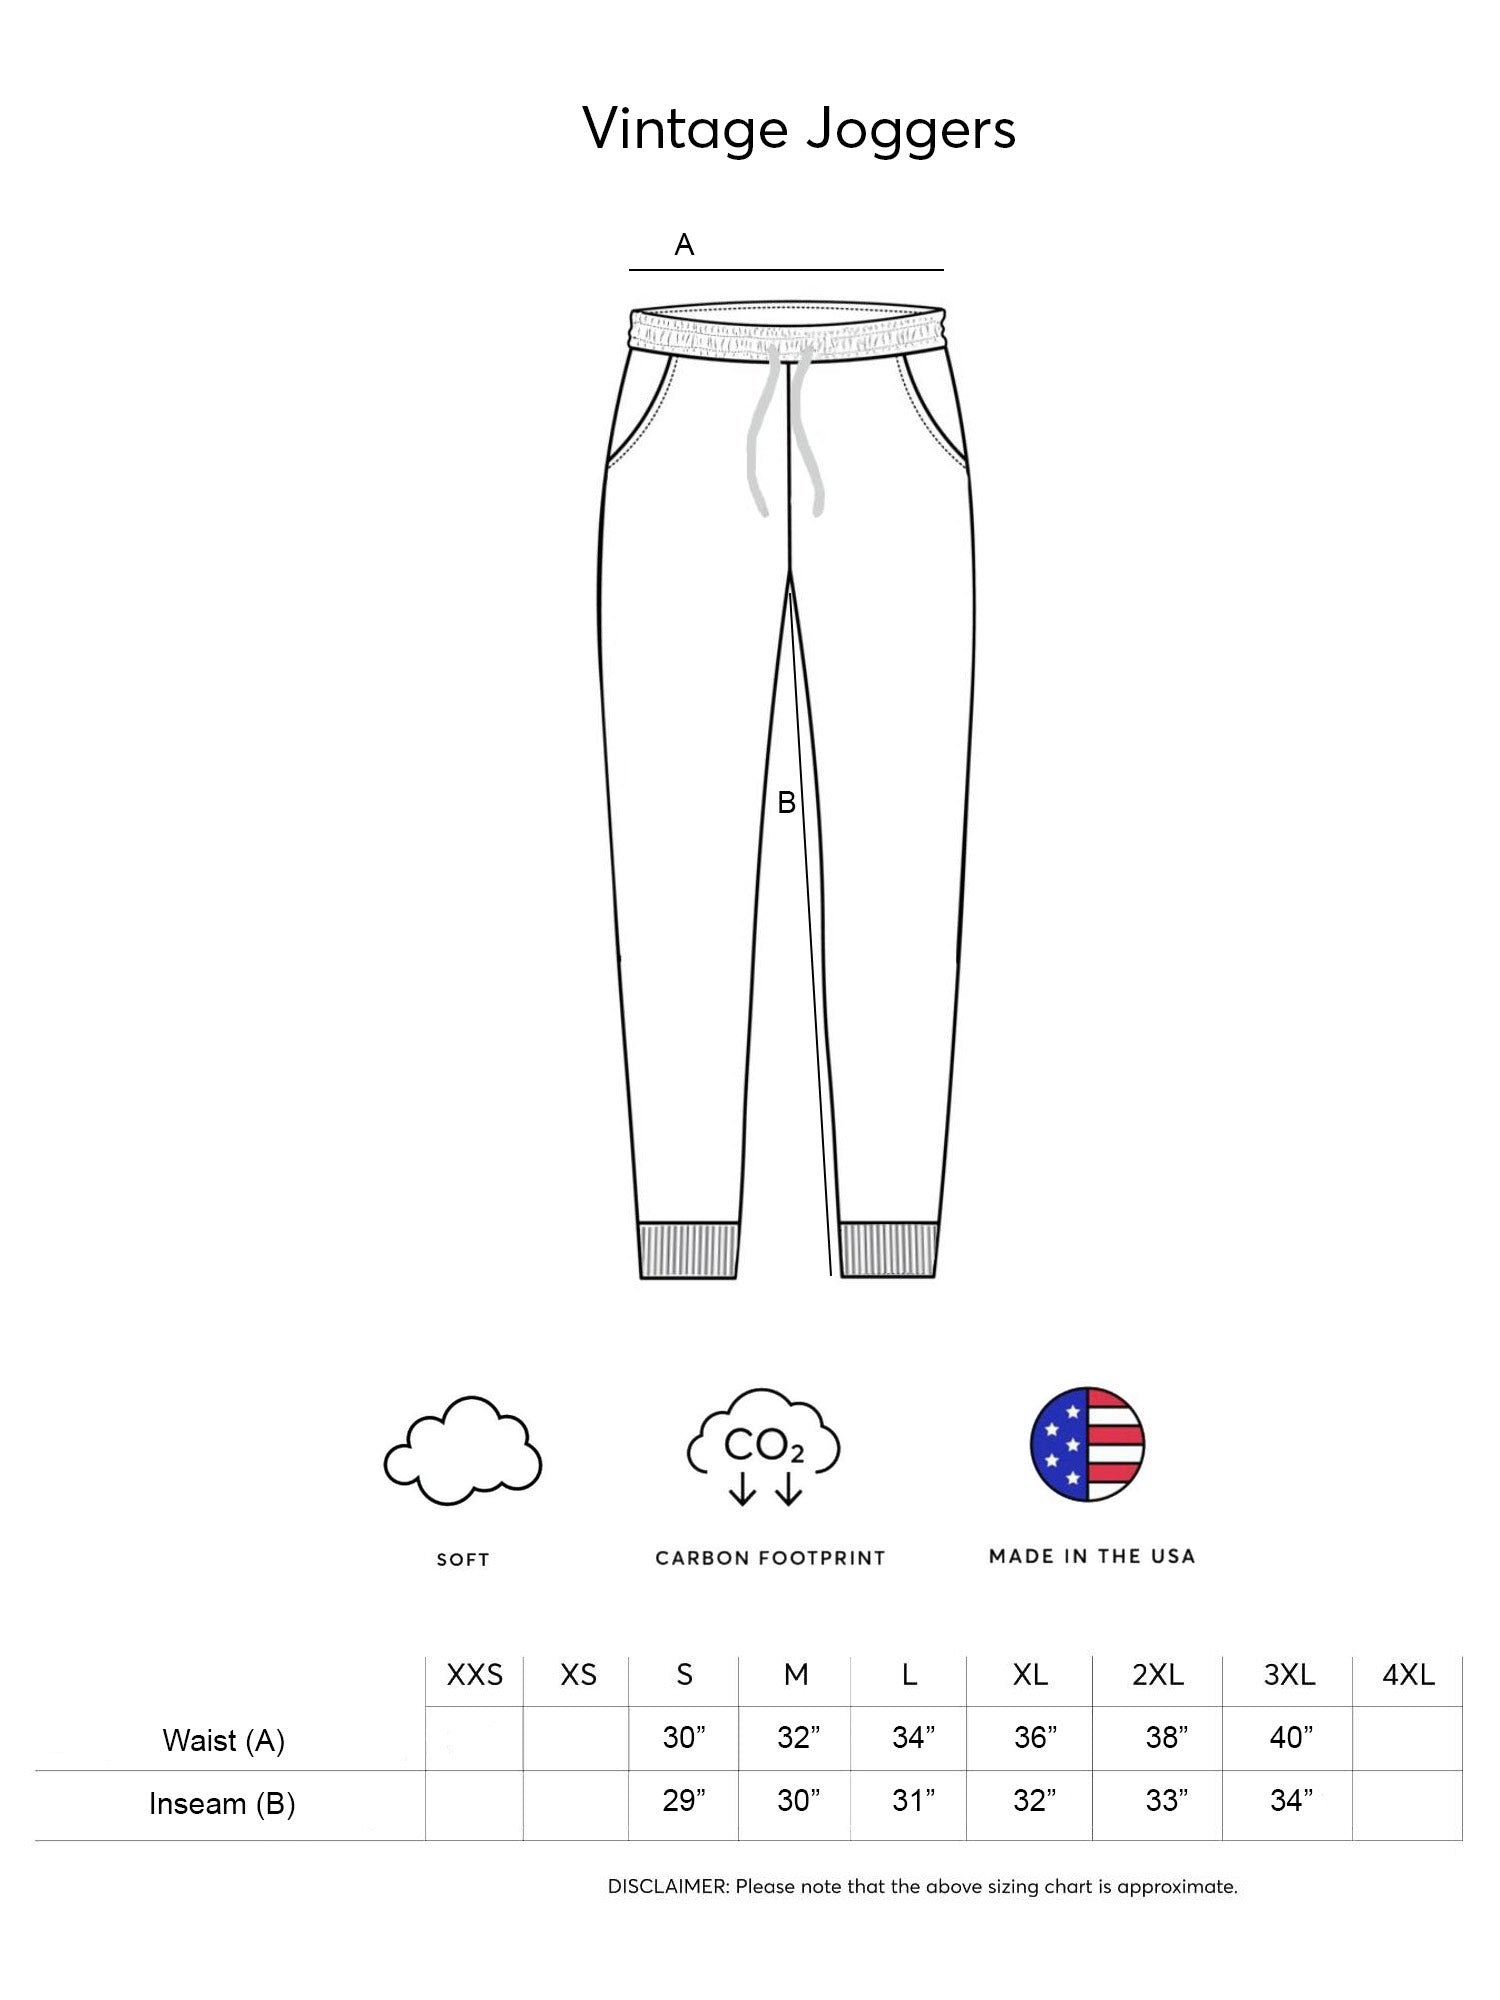 Expert Brand Retail Vintage Joggers Sizing Chart